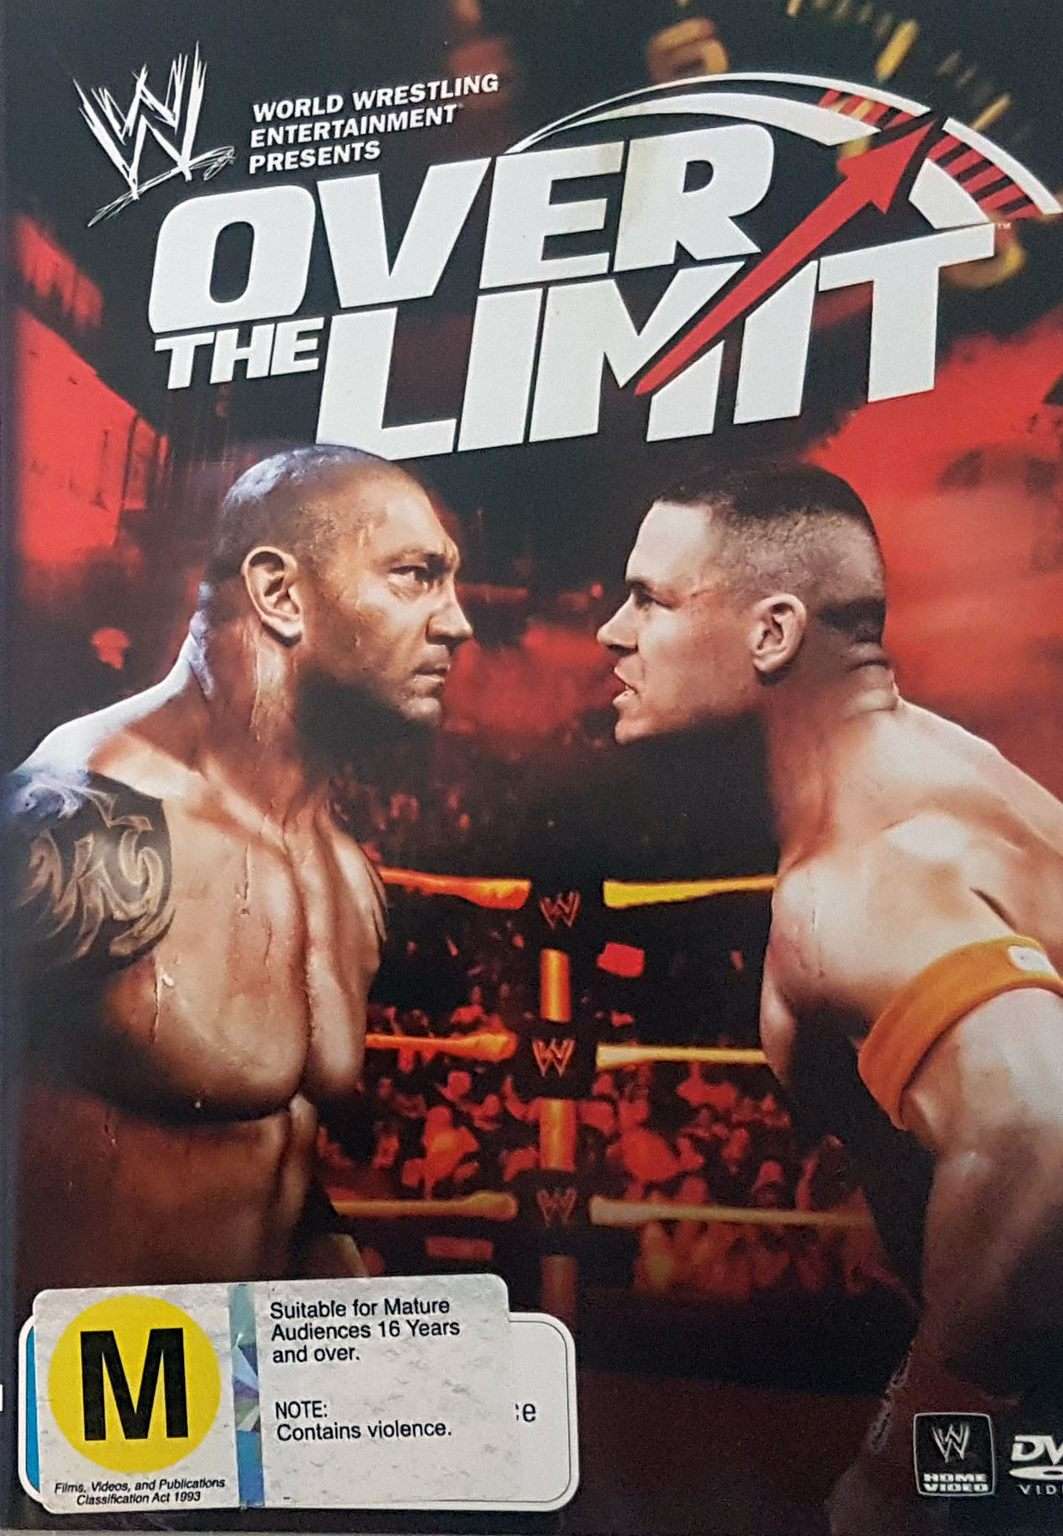 WWE: Over the Limit 2010